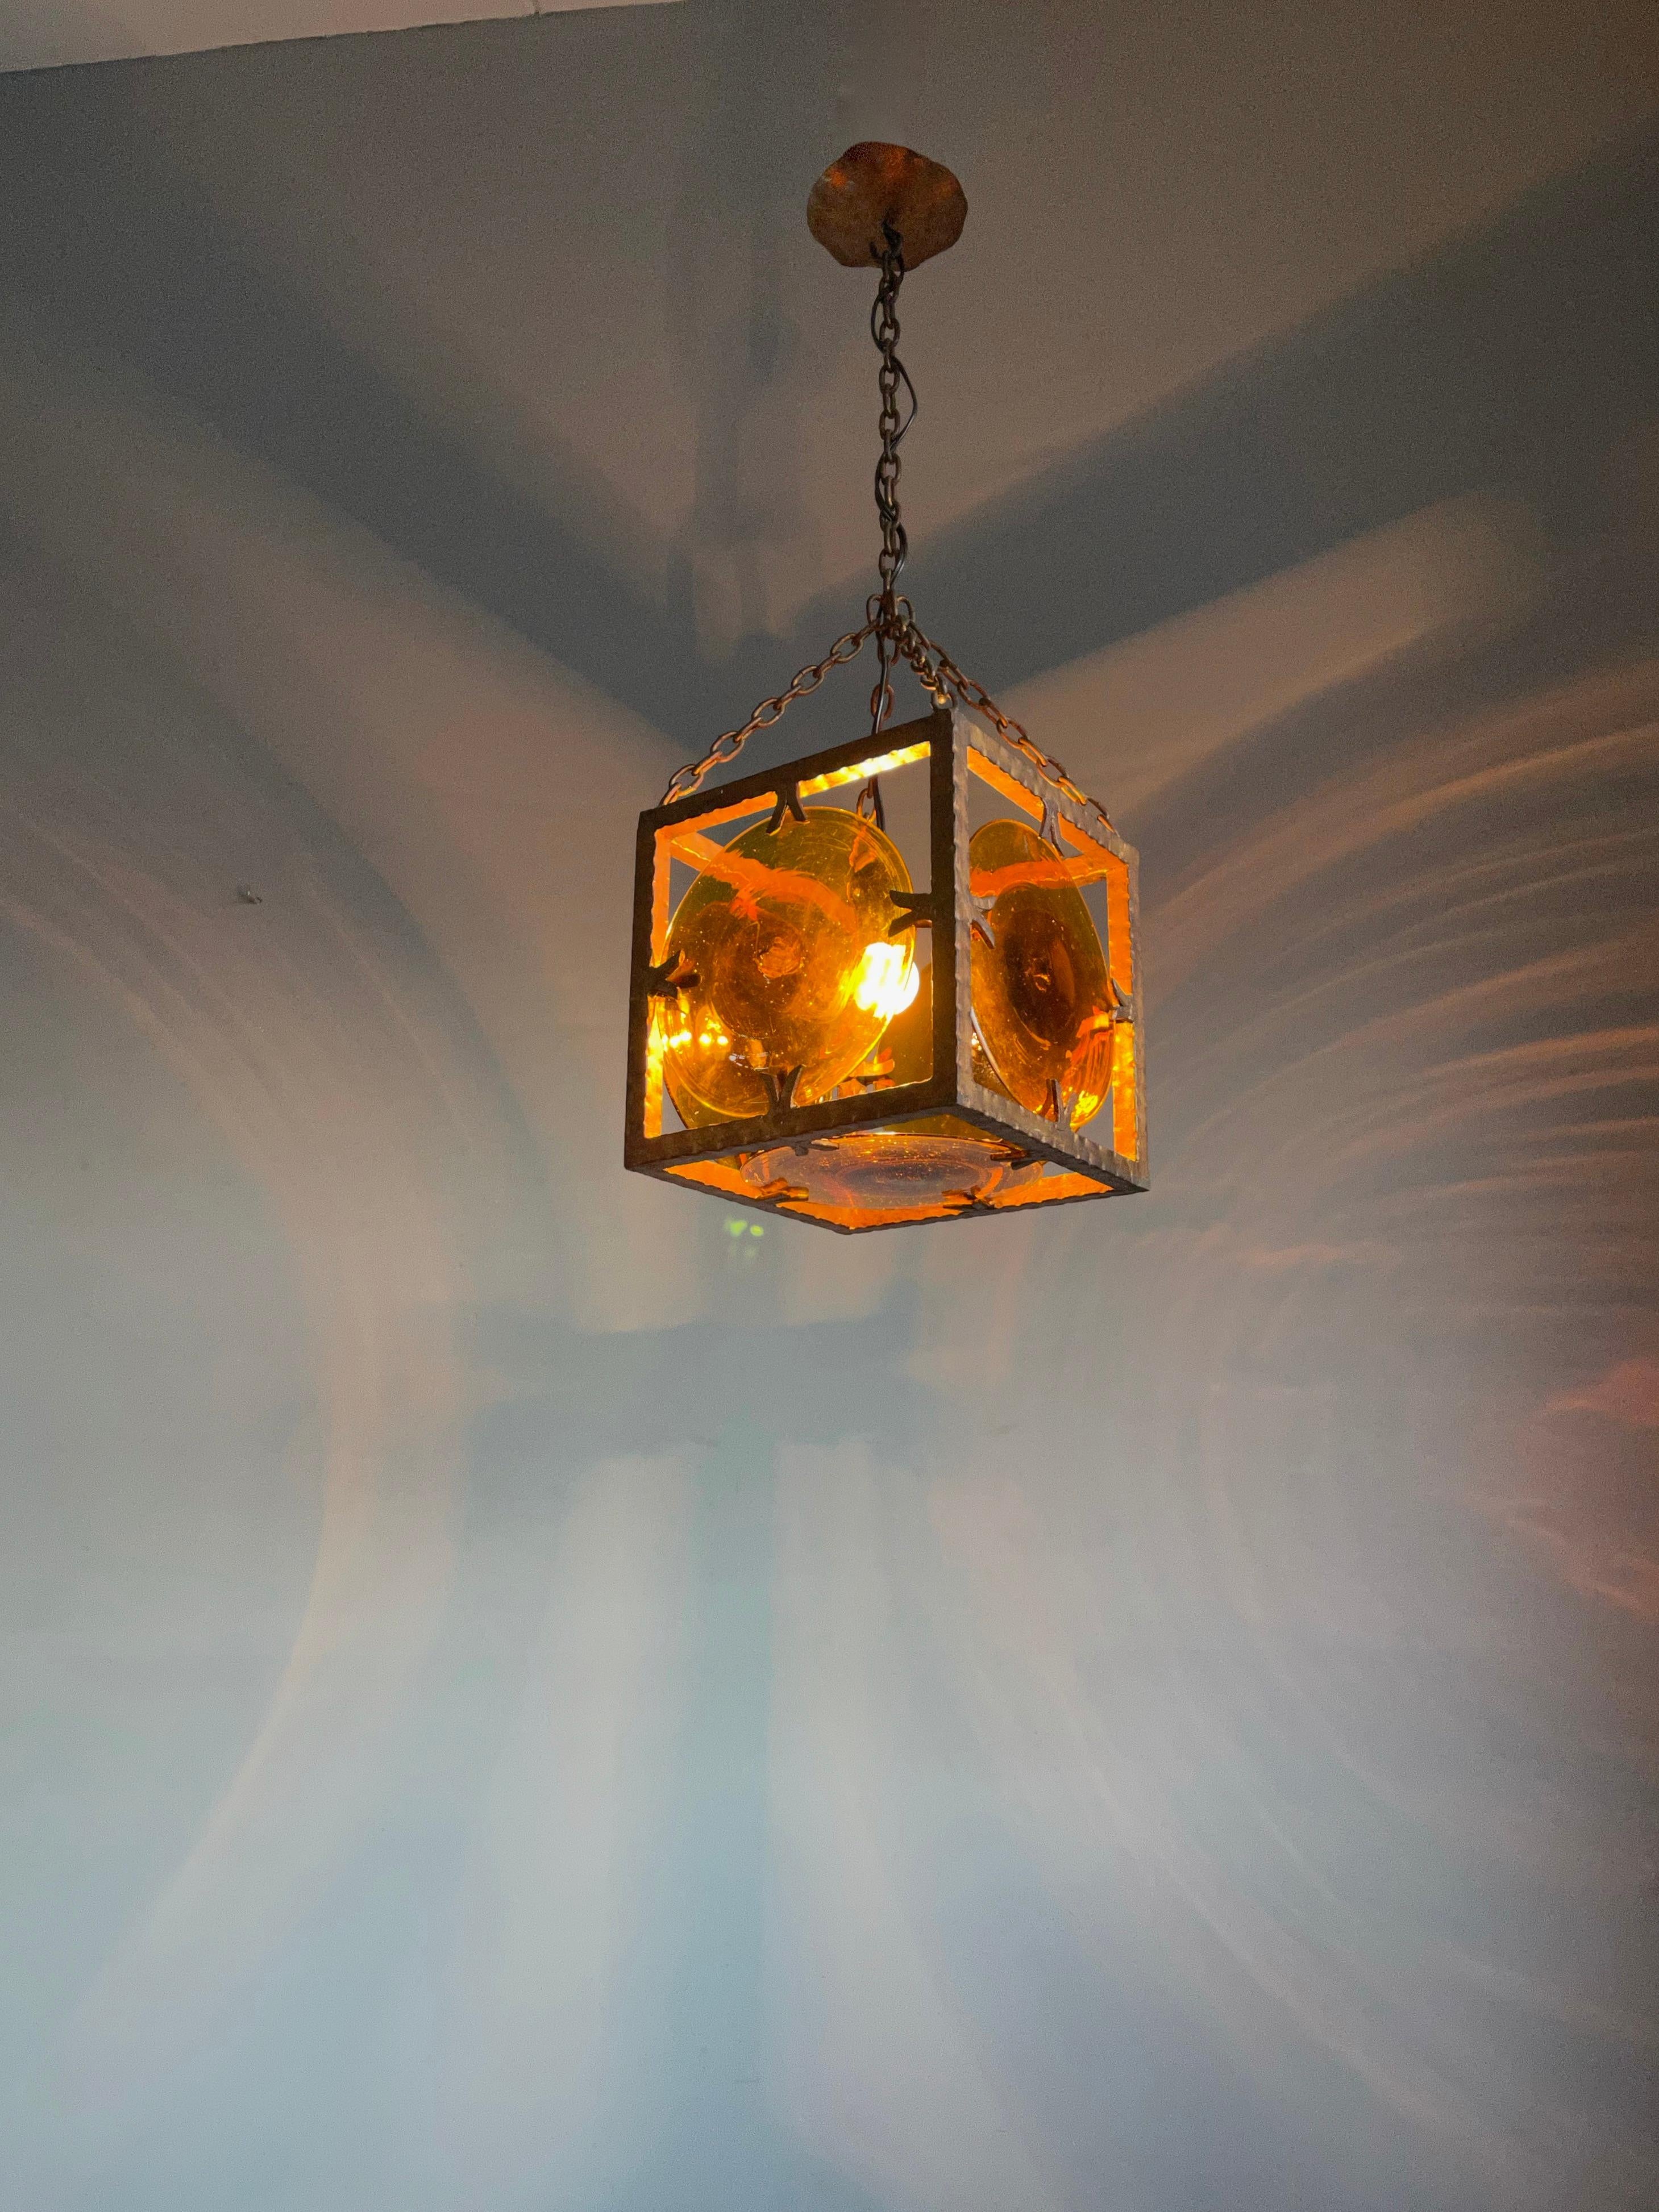 Forged Midcentury Brutalist Pendant Light with Stunning Murano Mouth Blown Glass Discs